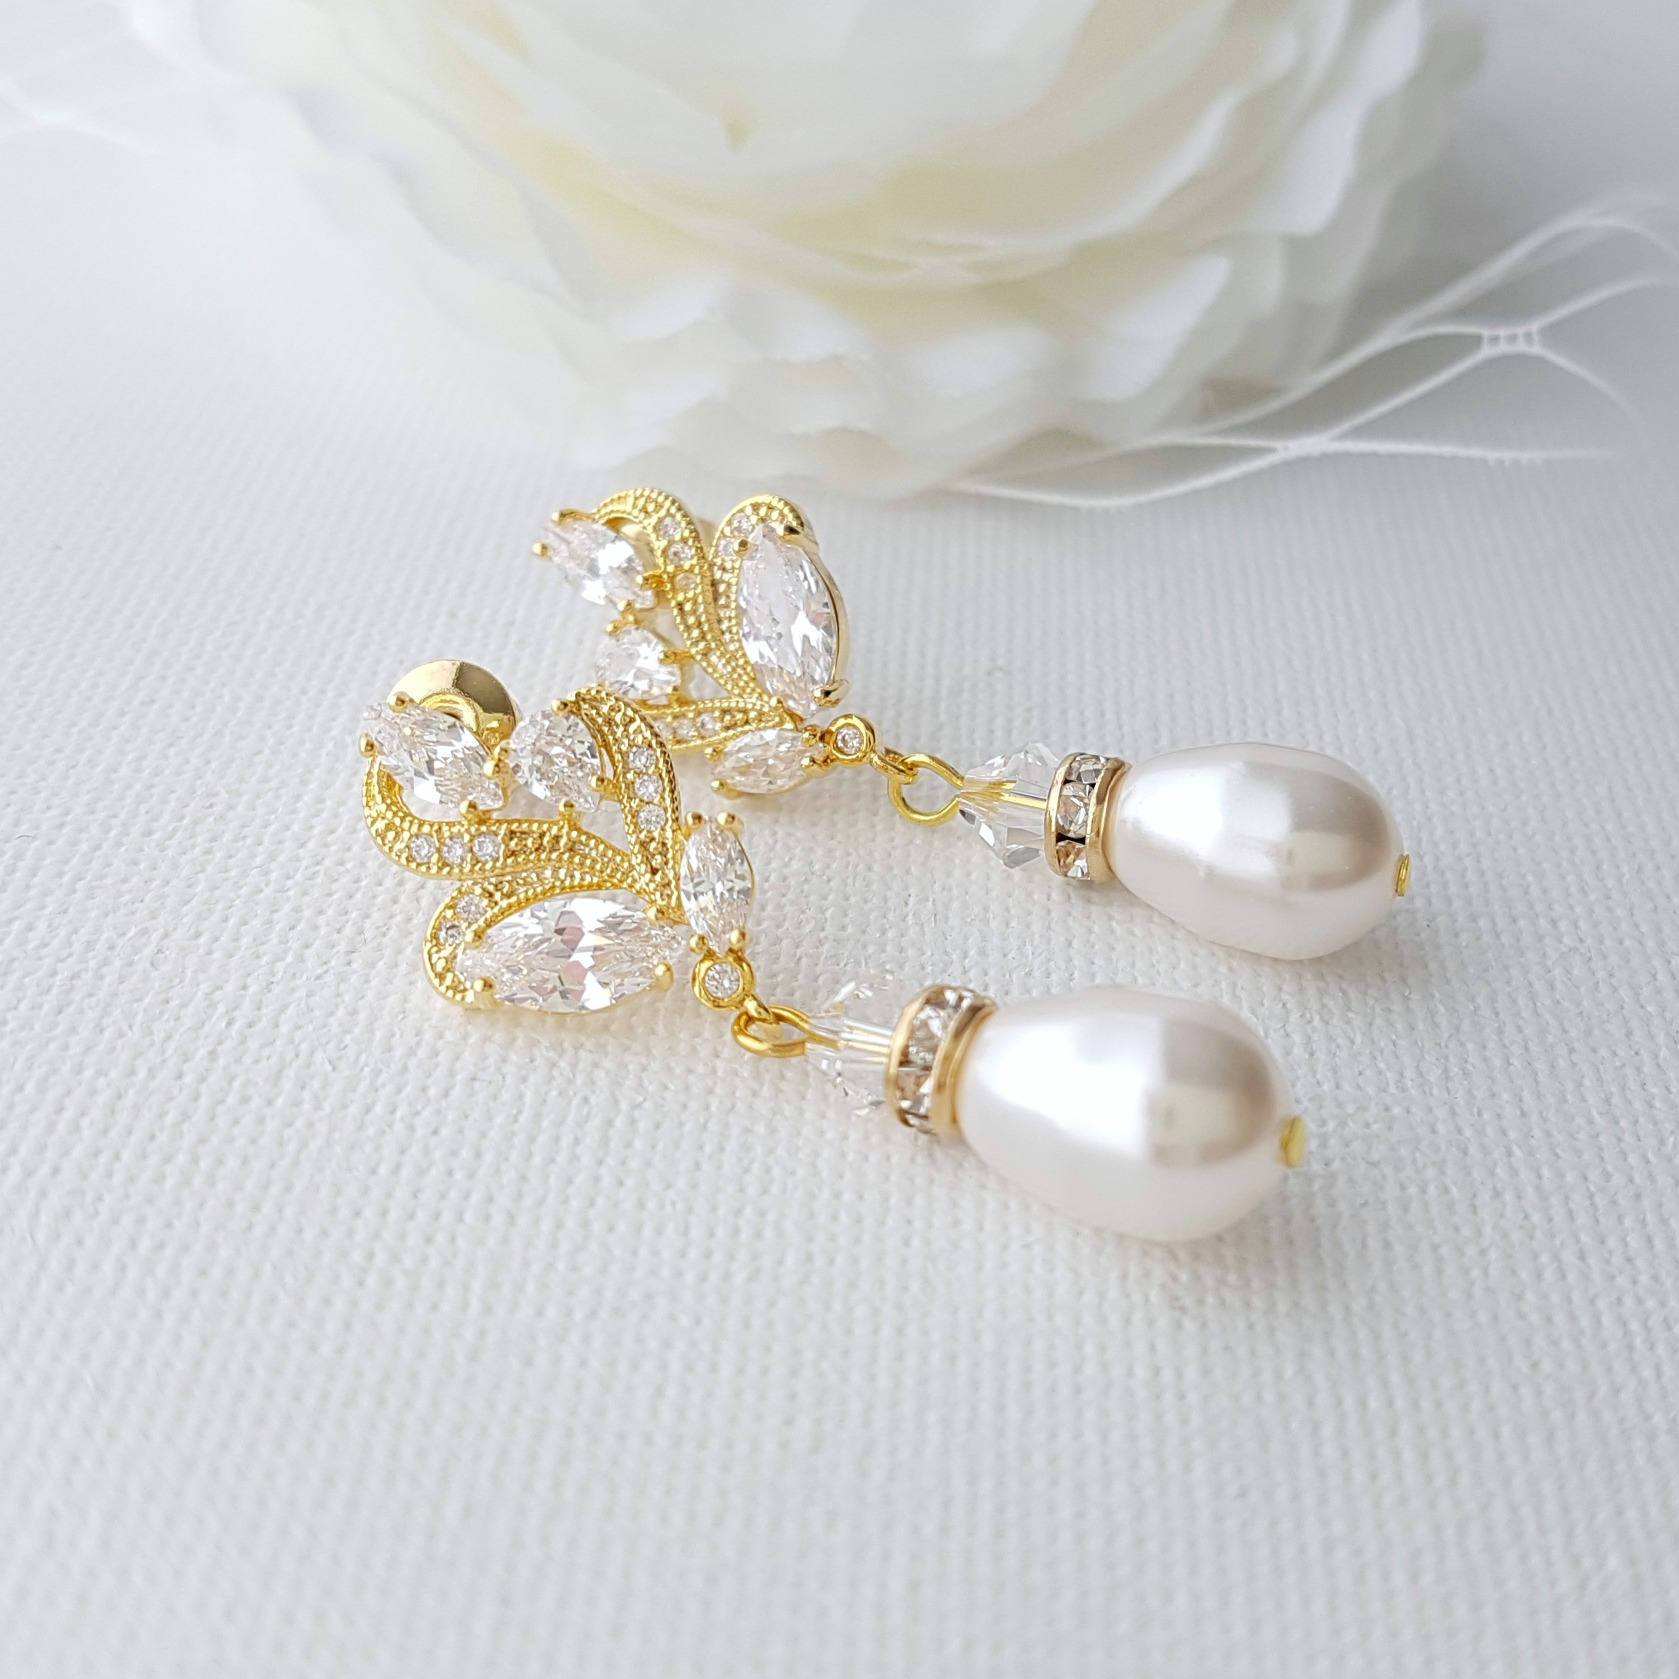 Rose Gold Bridal Earrings With Pearl Drops-Wavy - PoetryDesigns